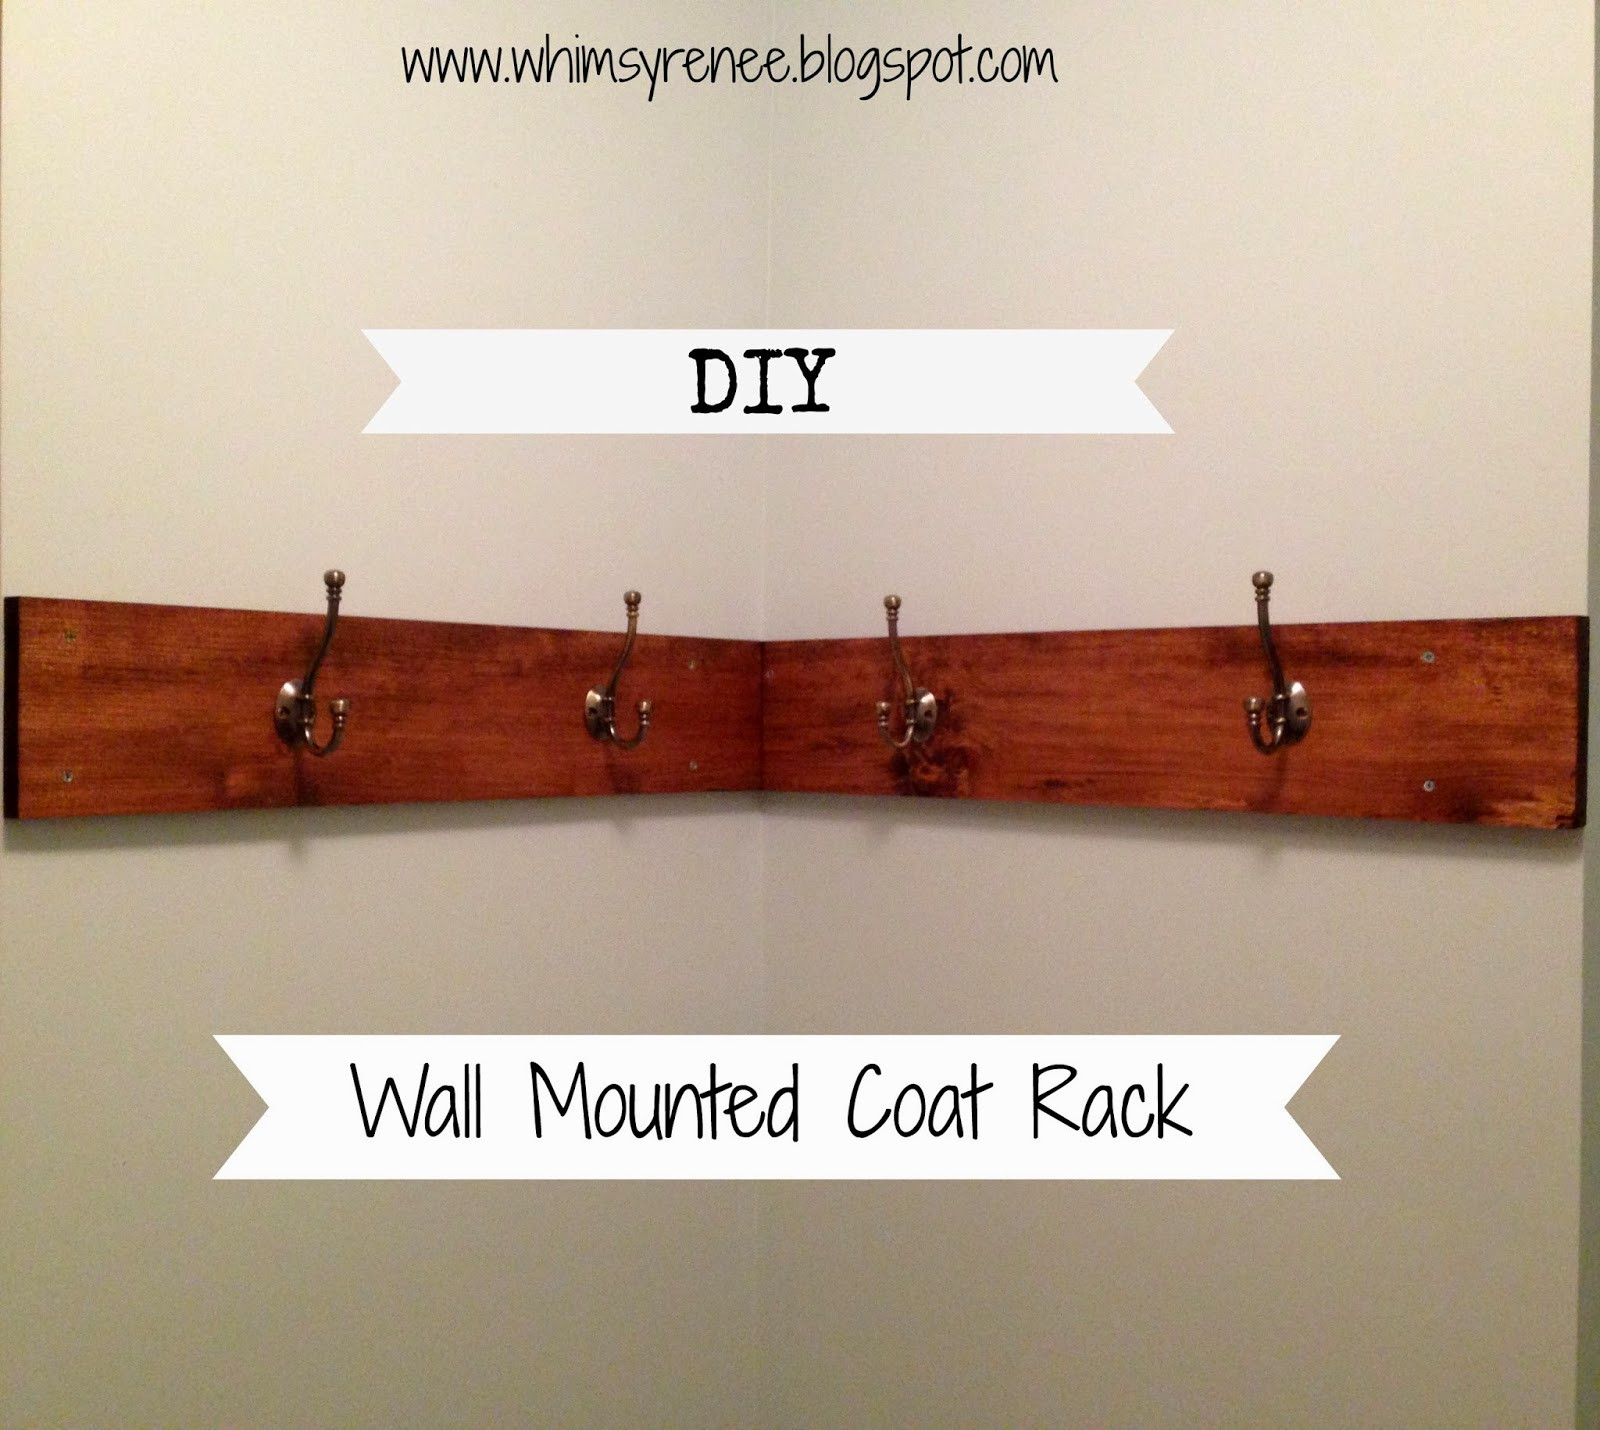 Best ideas about DIY Wall Coat Rack
. Save or Pin Whimsy Renee DIY Wall Mounted Coat Rack Now.